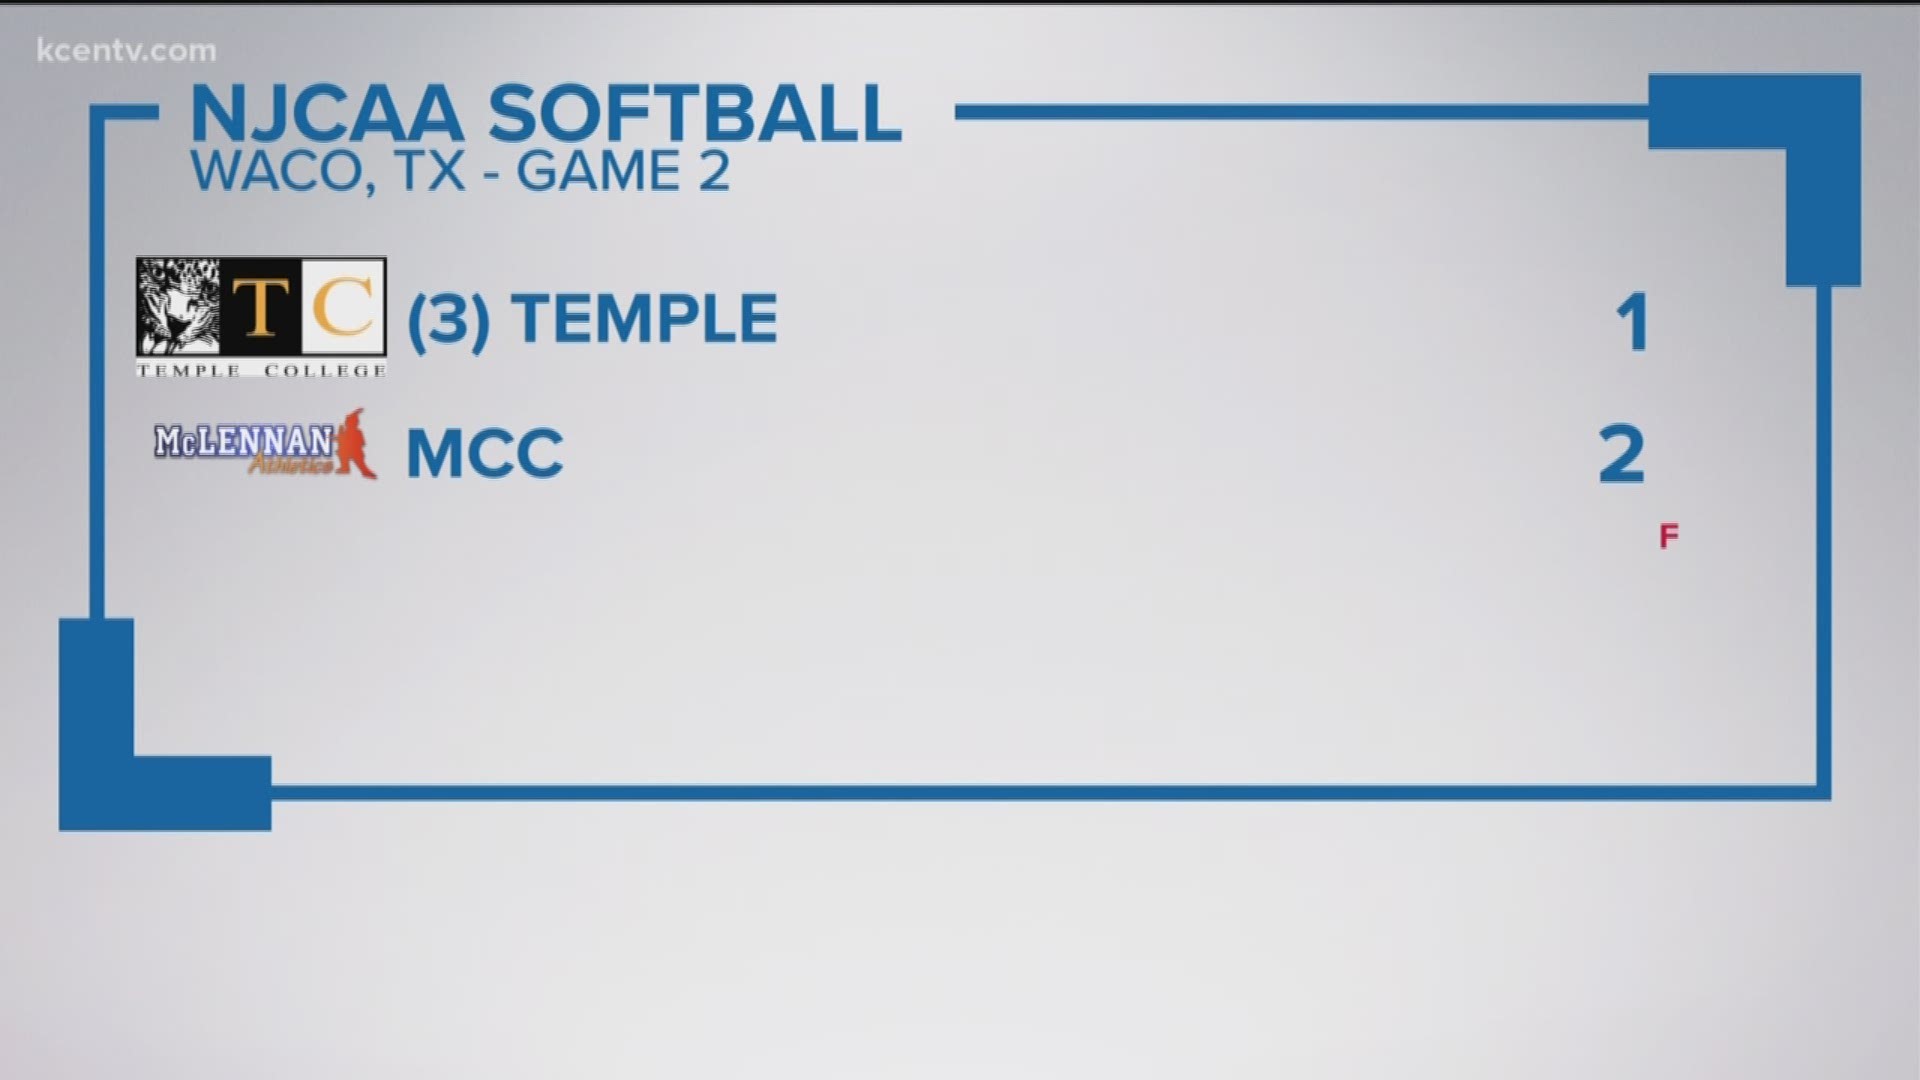 #3 Temple College paid a visit to MCC in game one of a doubleheader